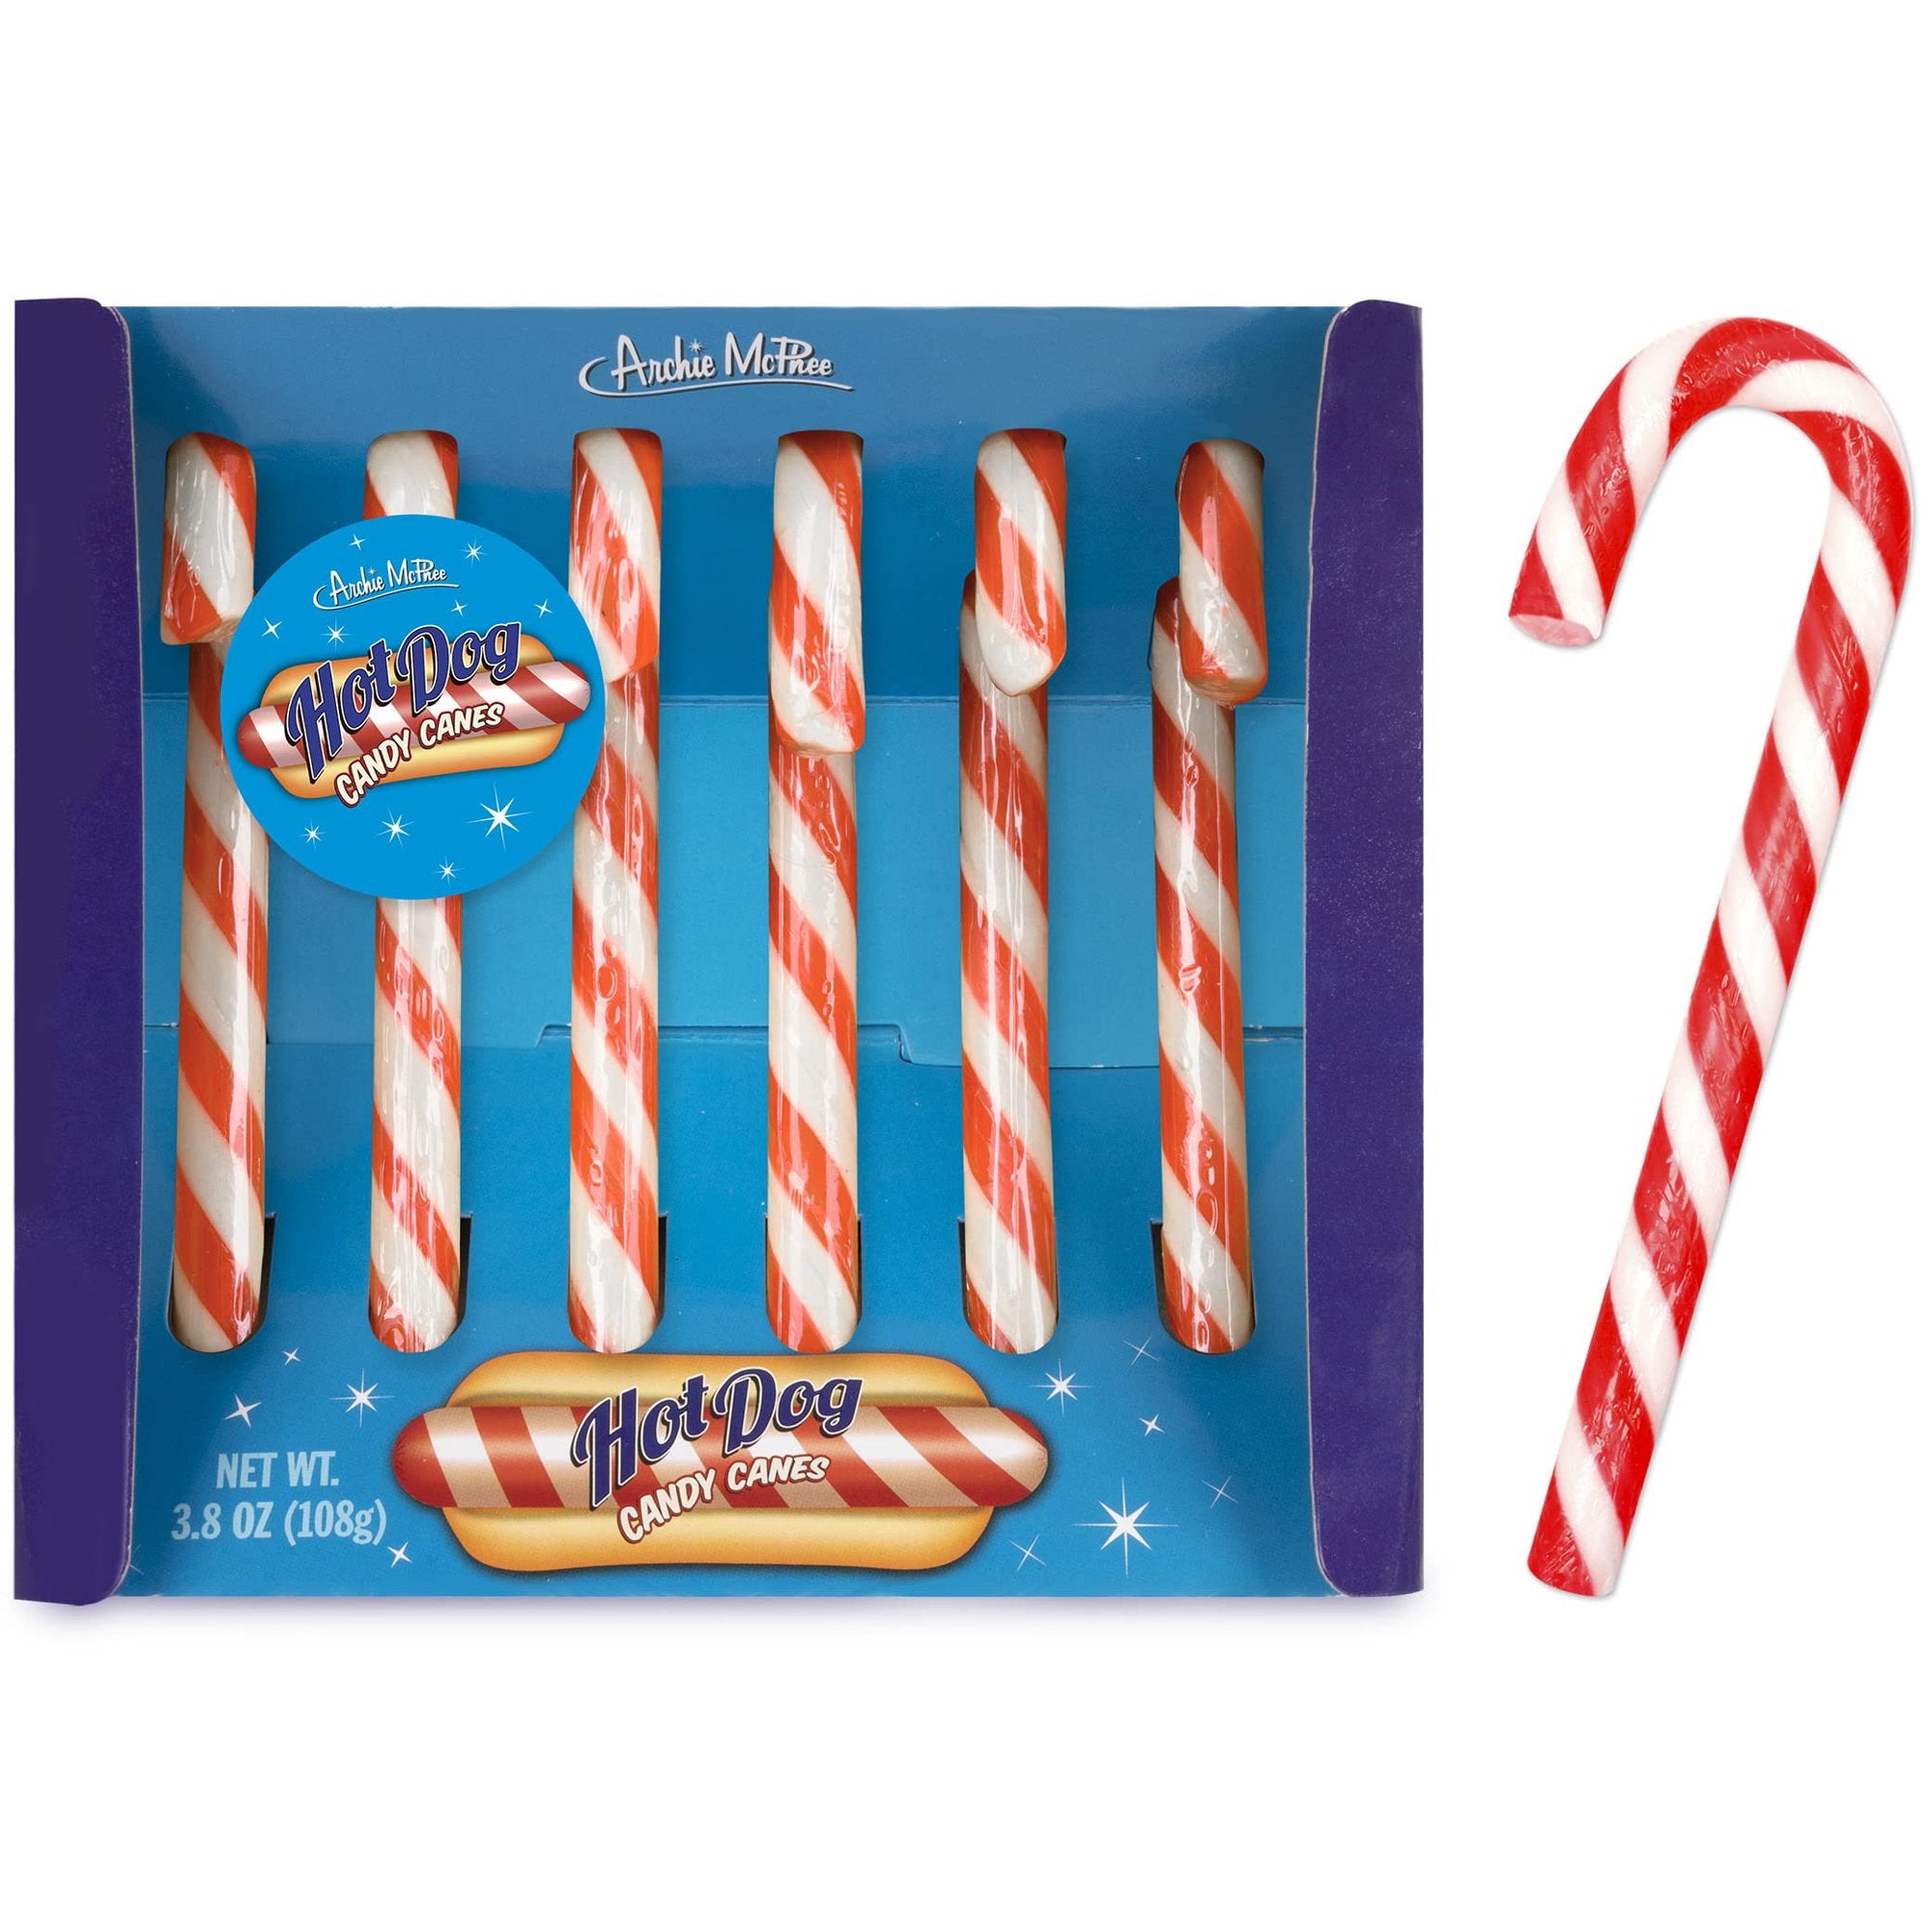 Dante's Inferno Hot Candy Canes  Gift Box of 6 Funny Spicy Candy